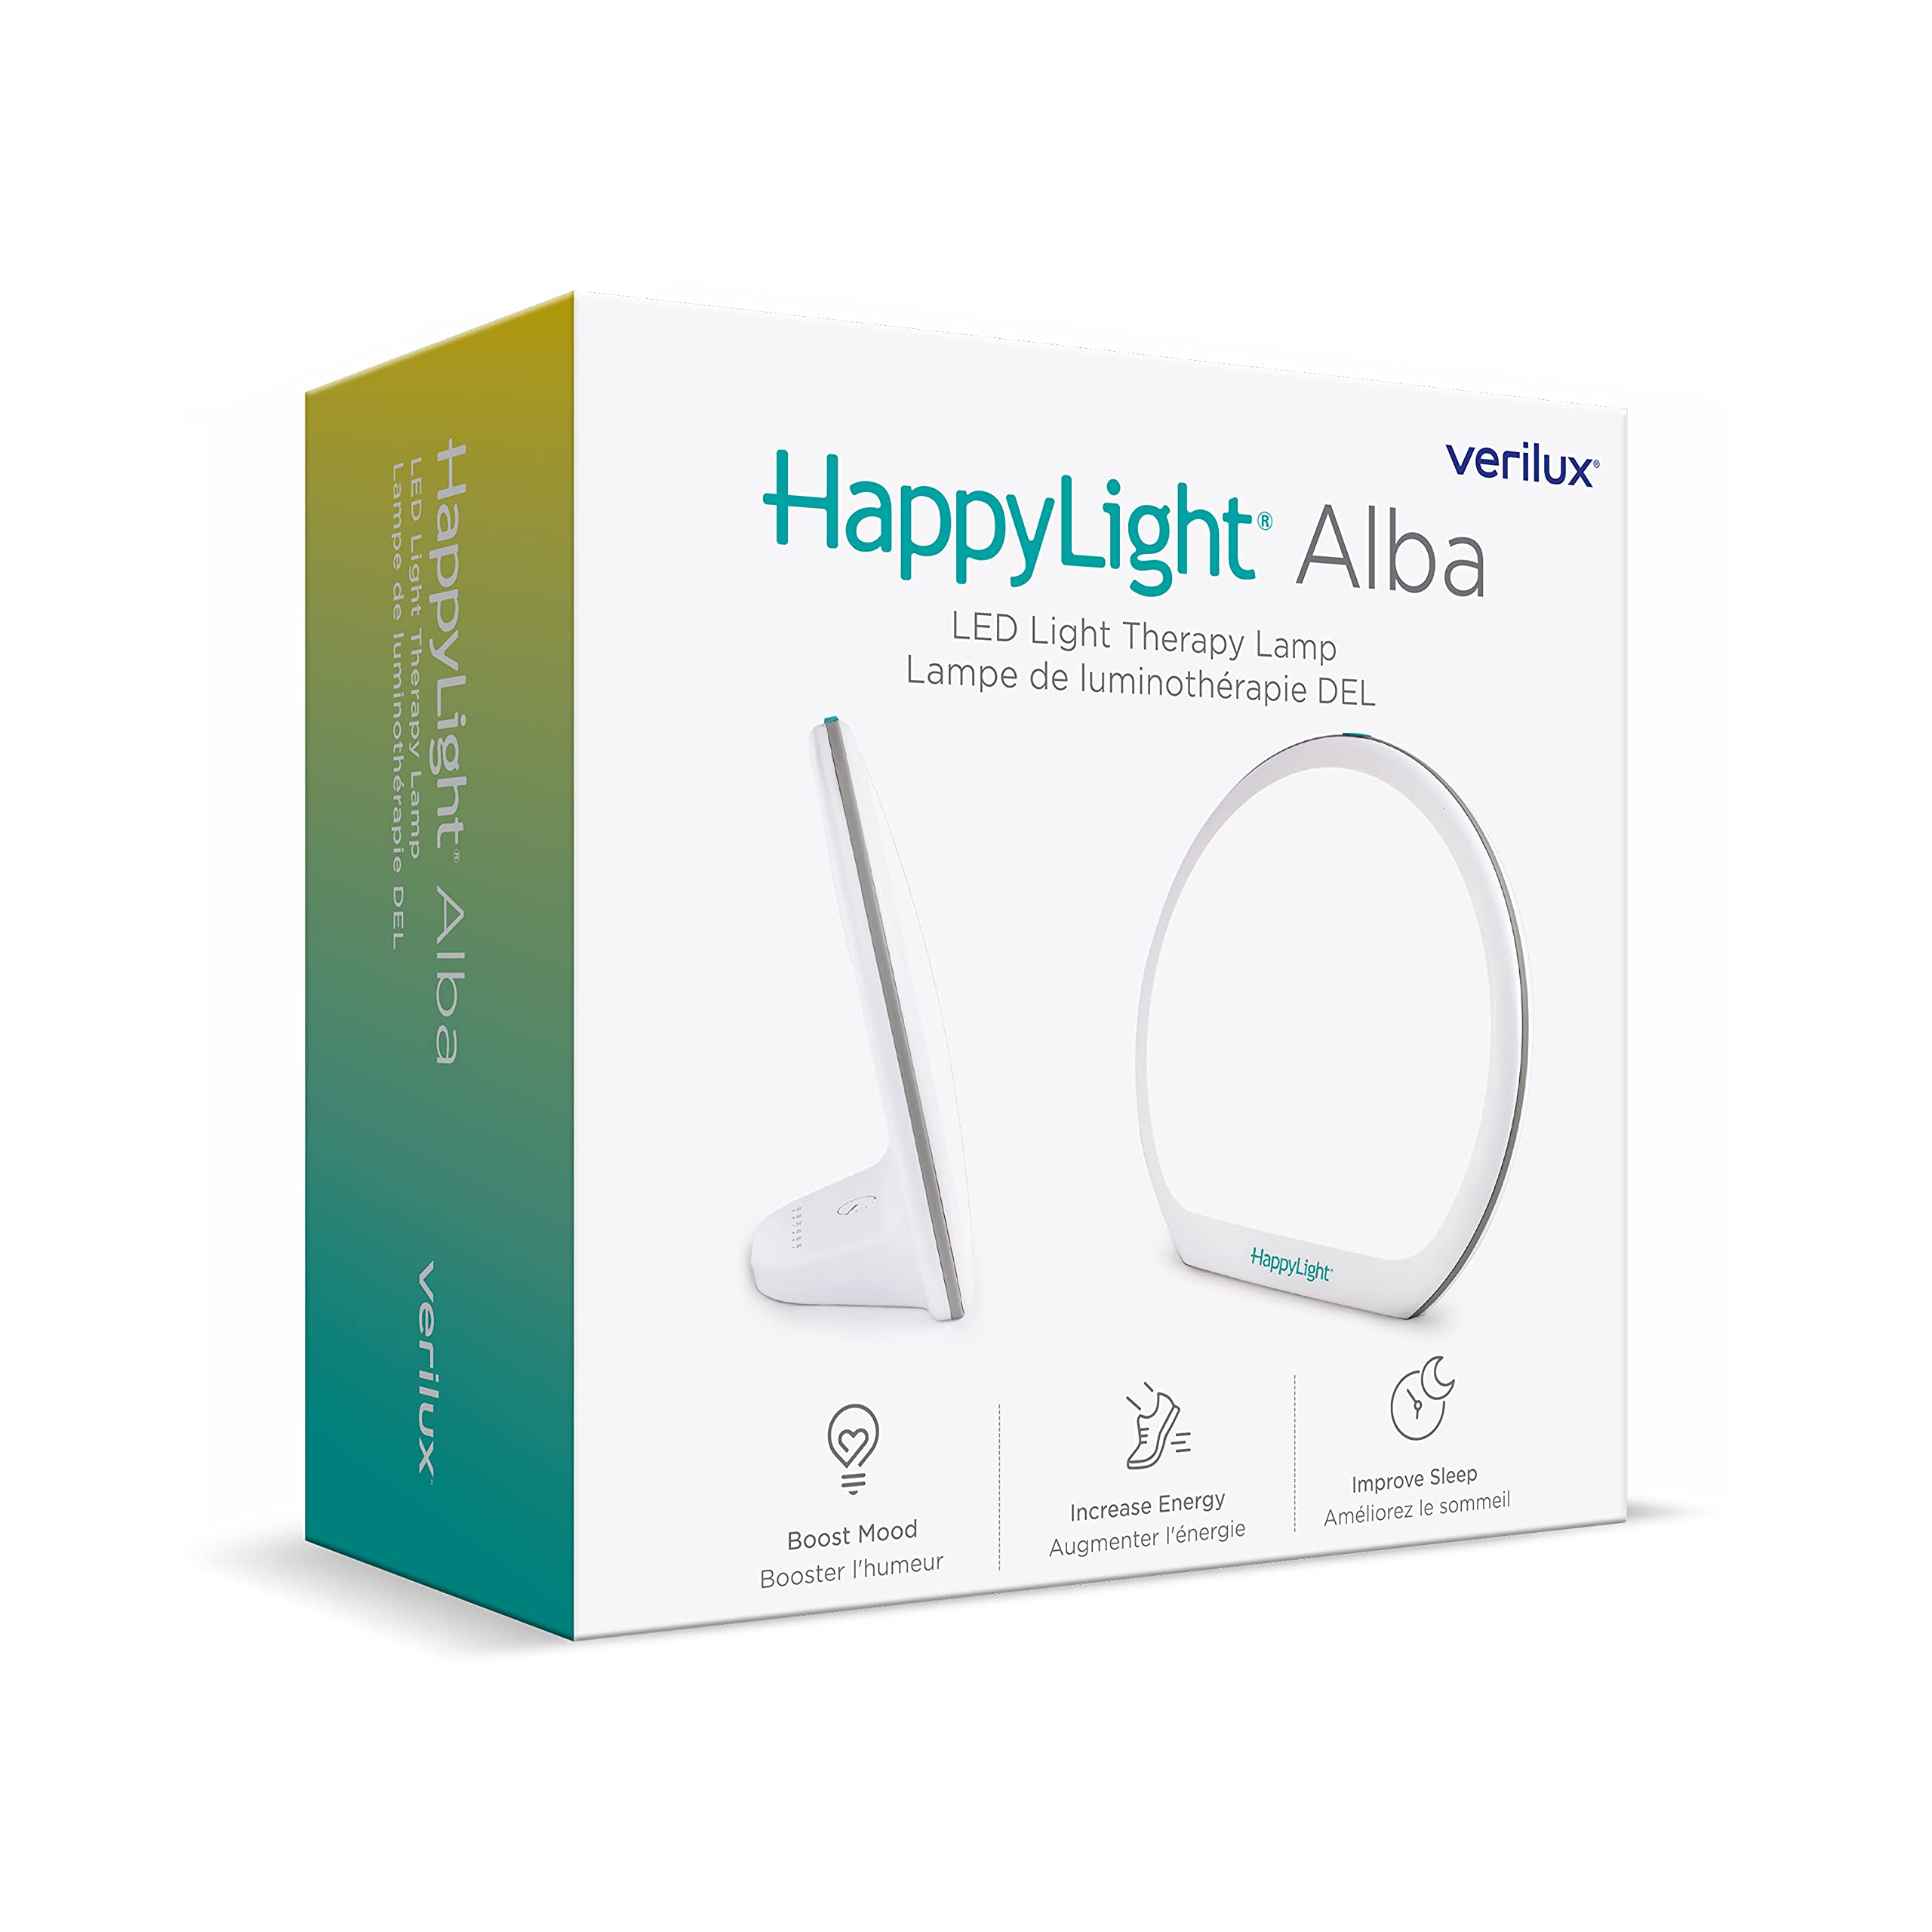 Verilux® HappyLight® Alba - New Round UV-Free LED Therapy Lamp, Bright White Light with 10,000 Lux, Adjustable Brightness, Color, and Countdown Timer